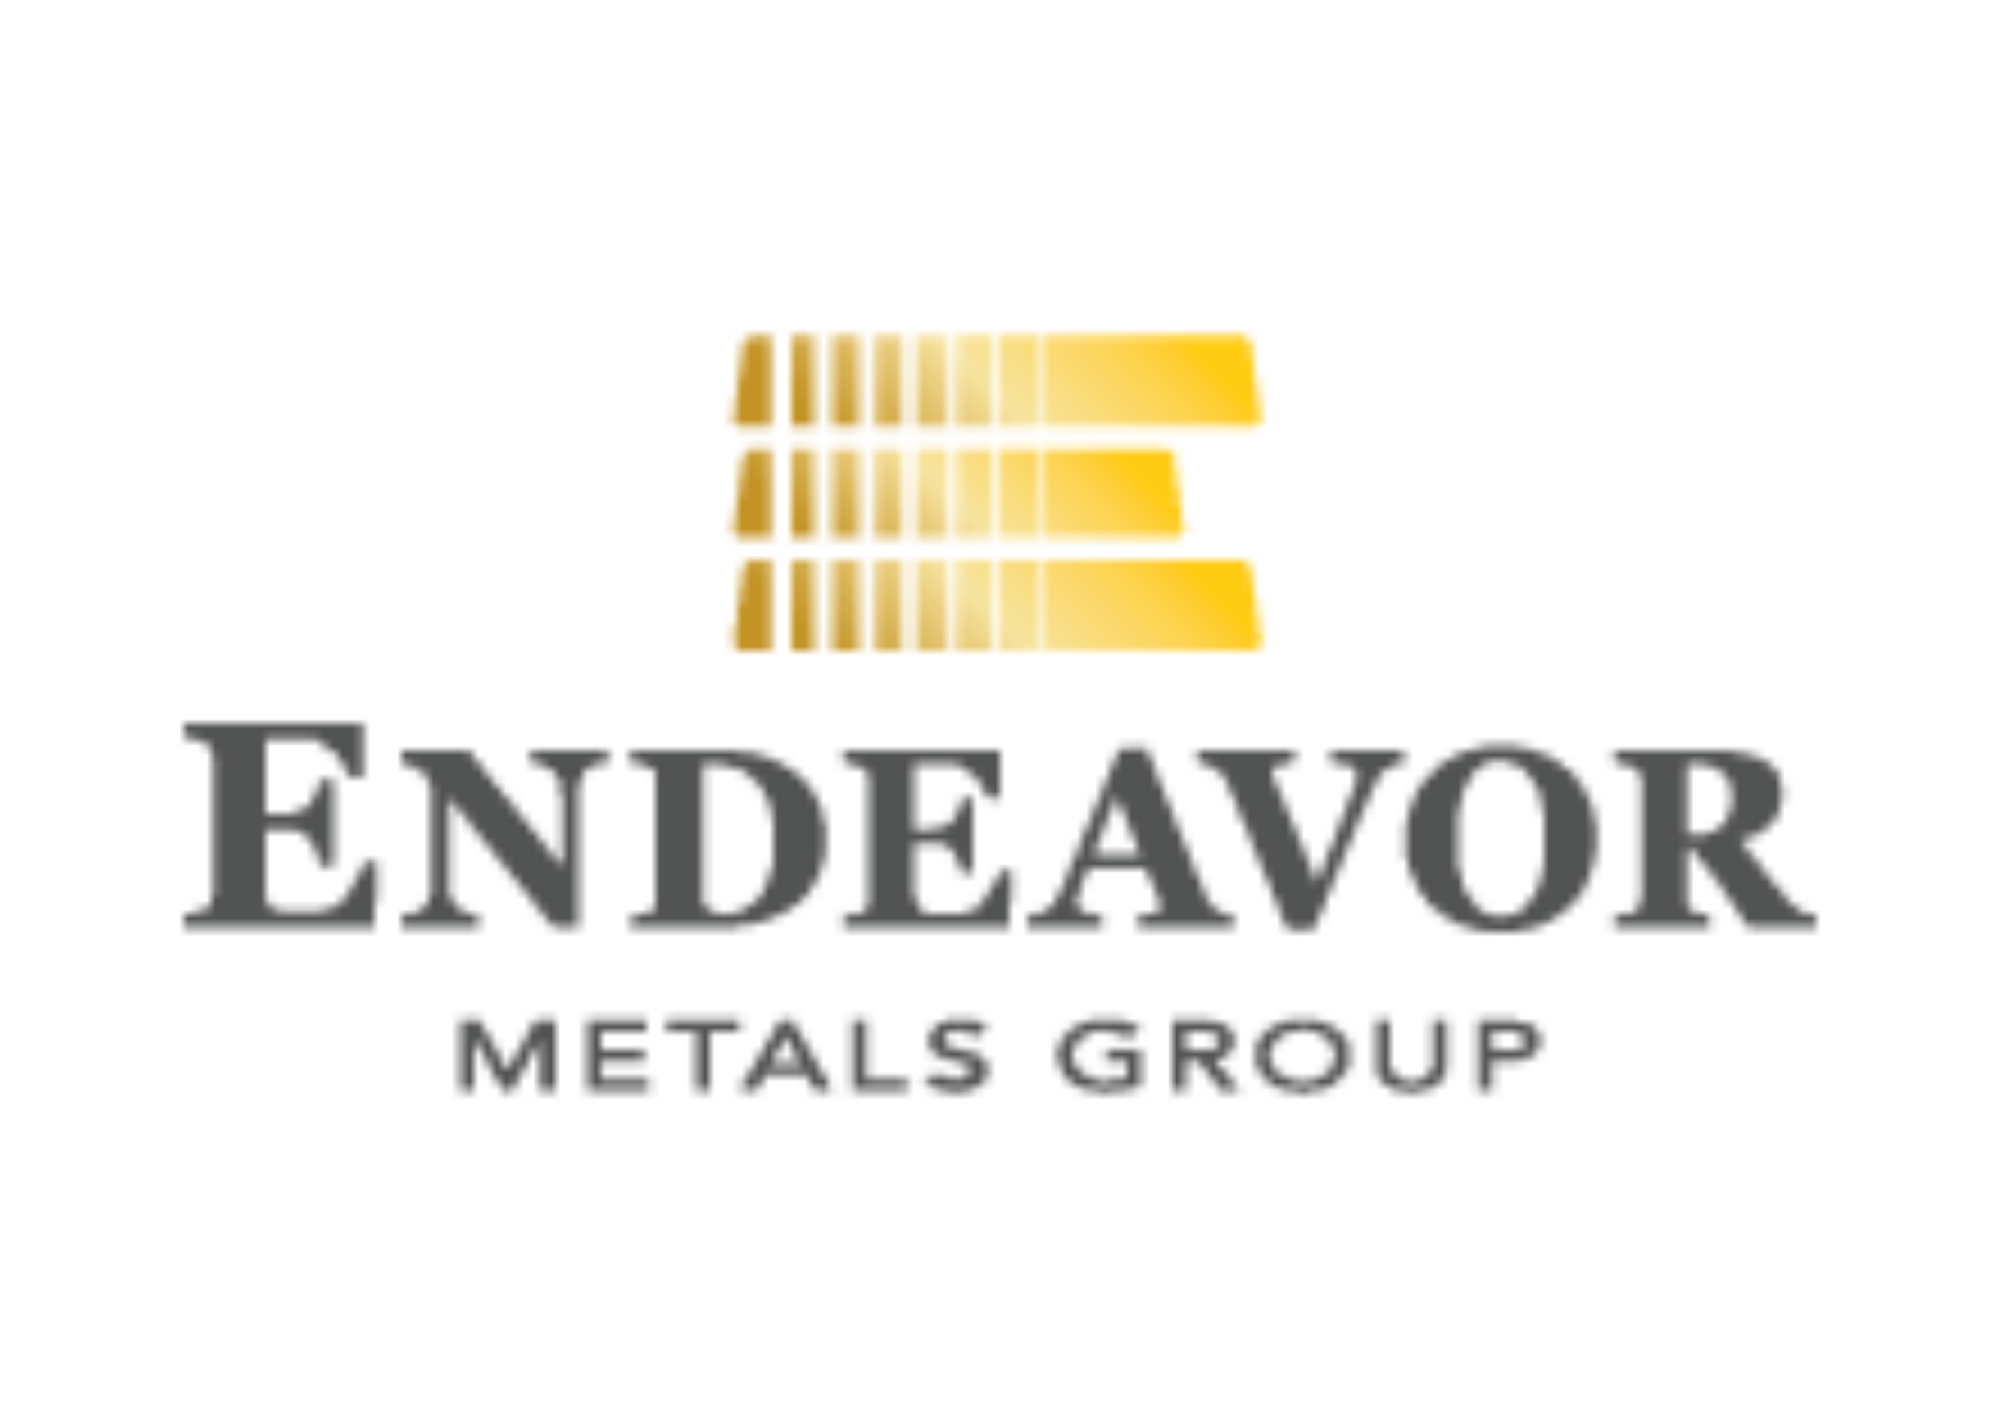 Endeavor Metals Group, Tuesday, May 24, 2022, Press release picture